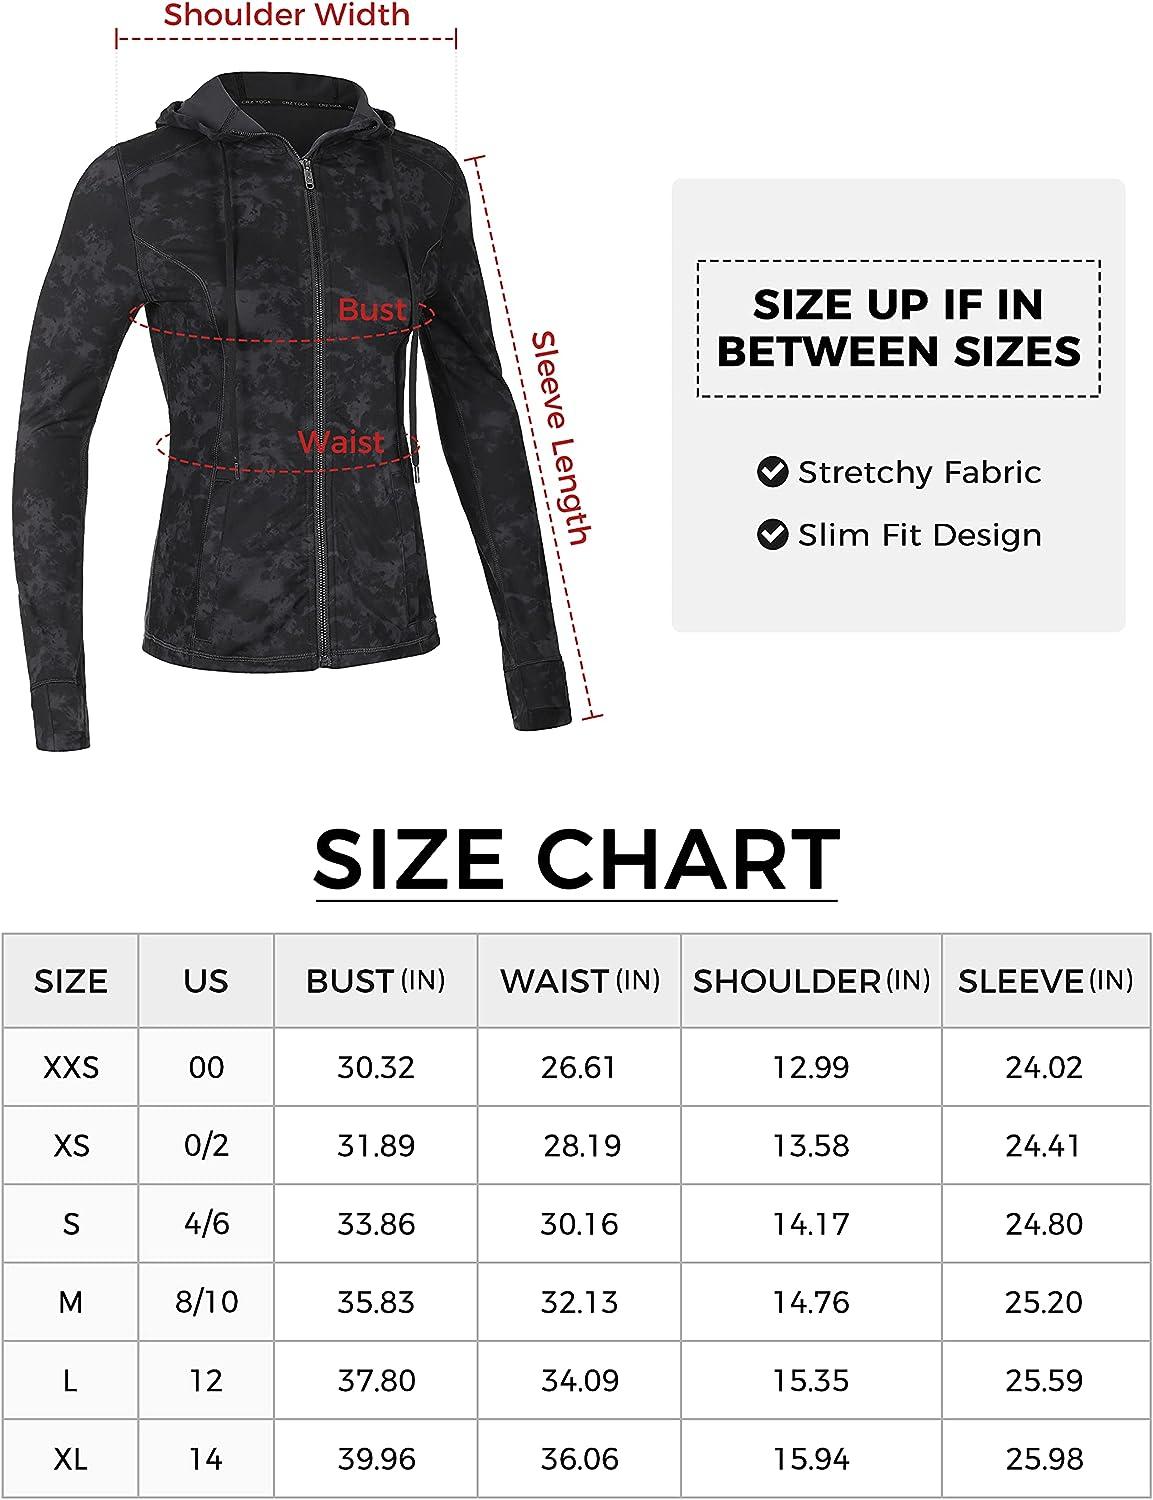 CRZ YOGA Butterluxe Womens Hooded Workout Jacket - Zip Up Athletic Running  Jacket with Back Mesh Vent